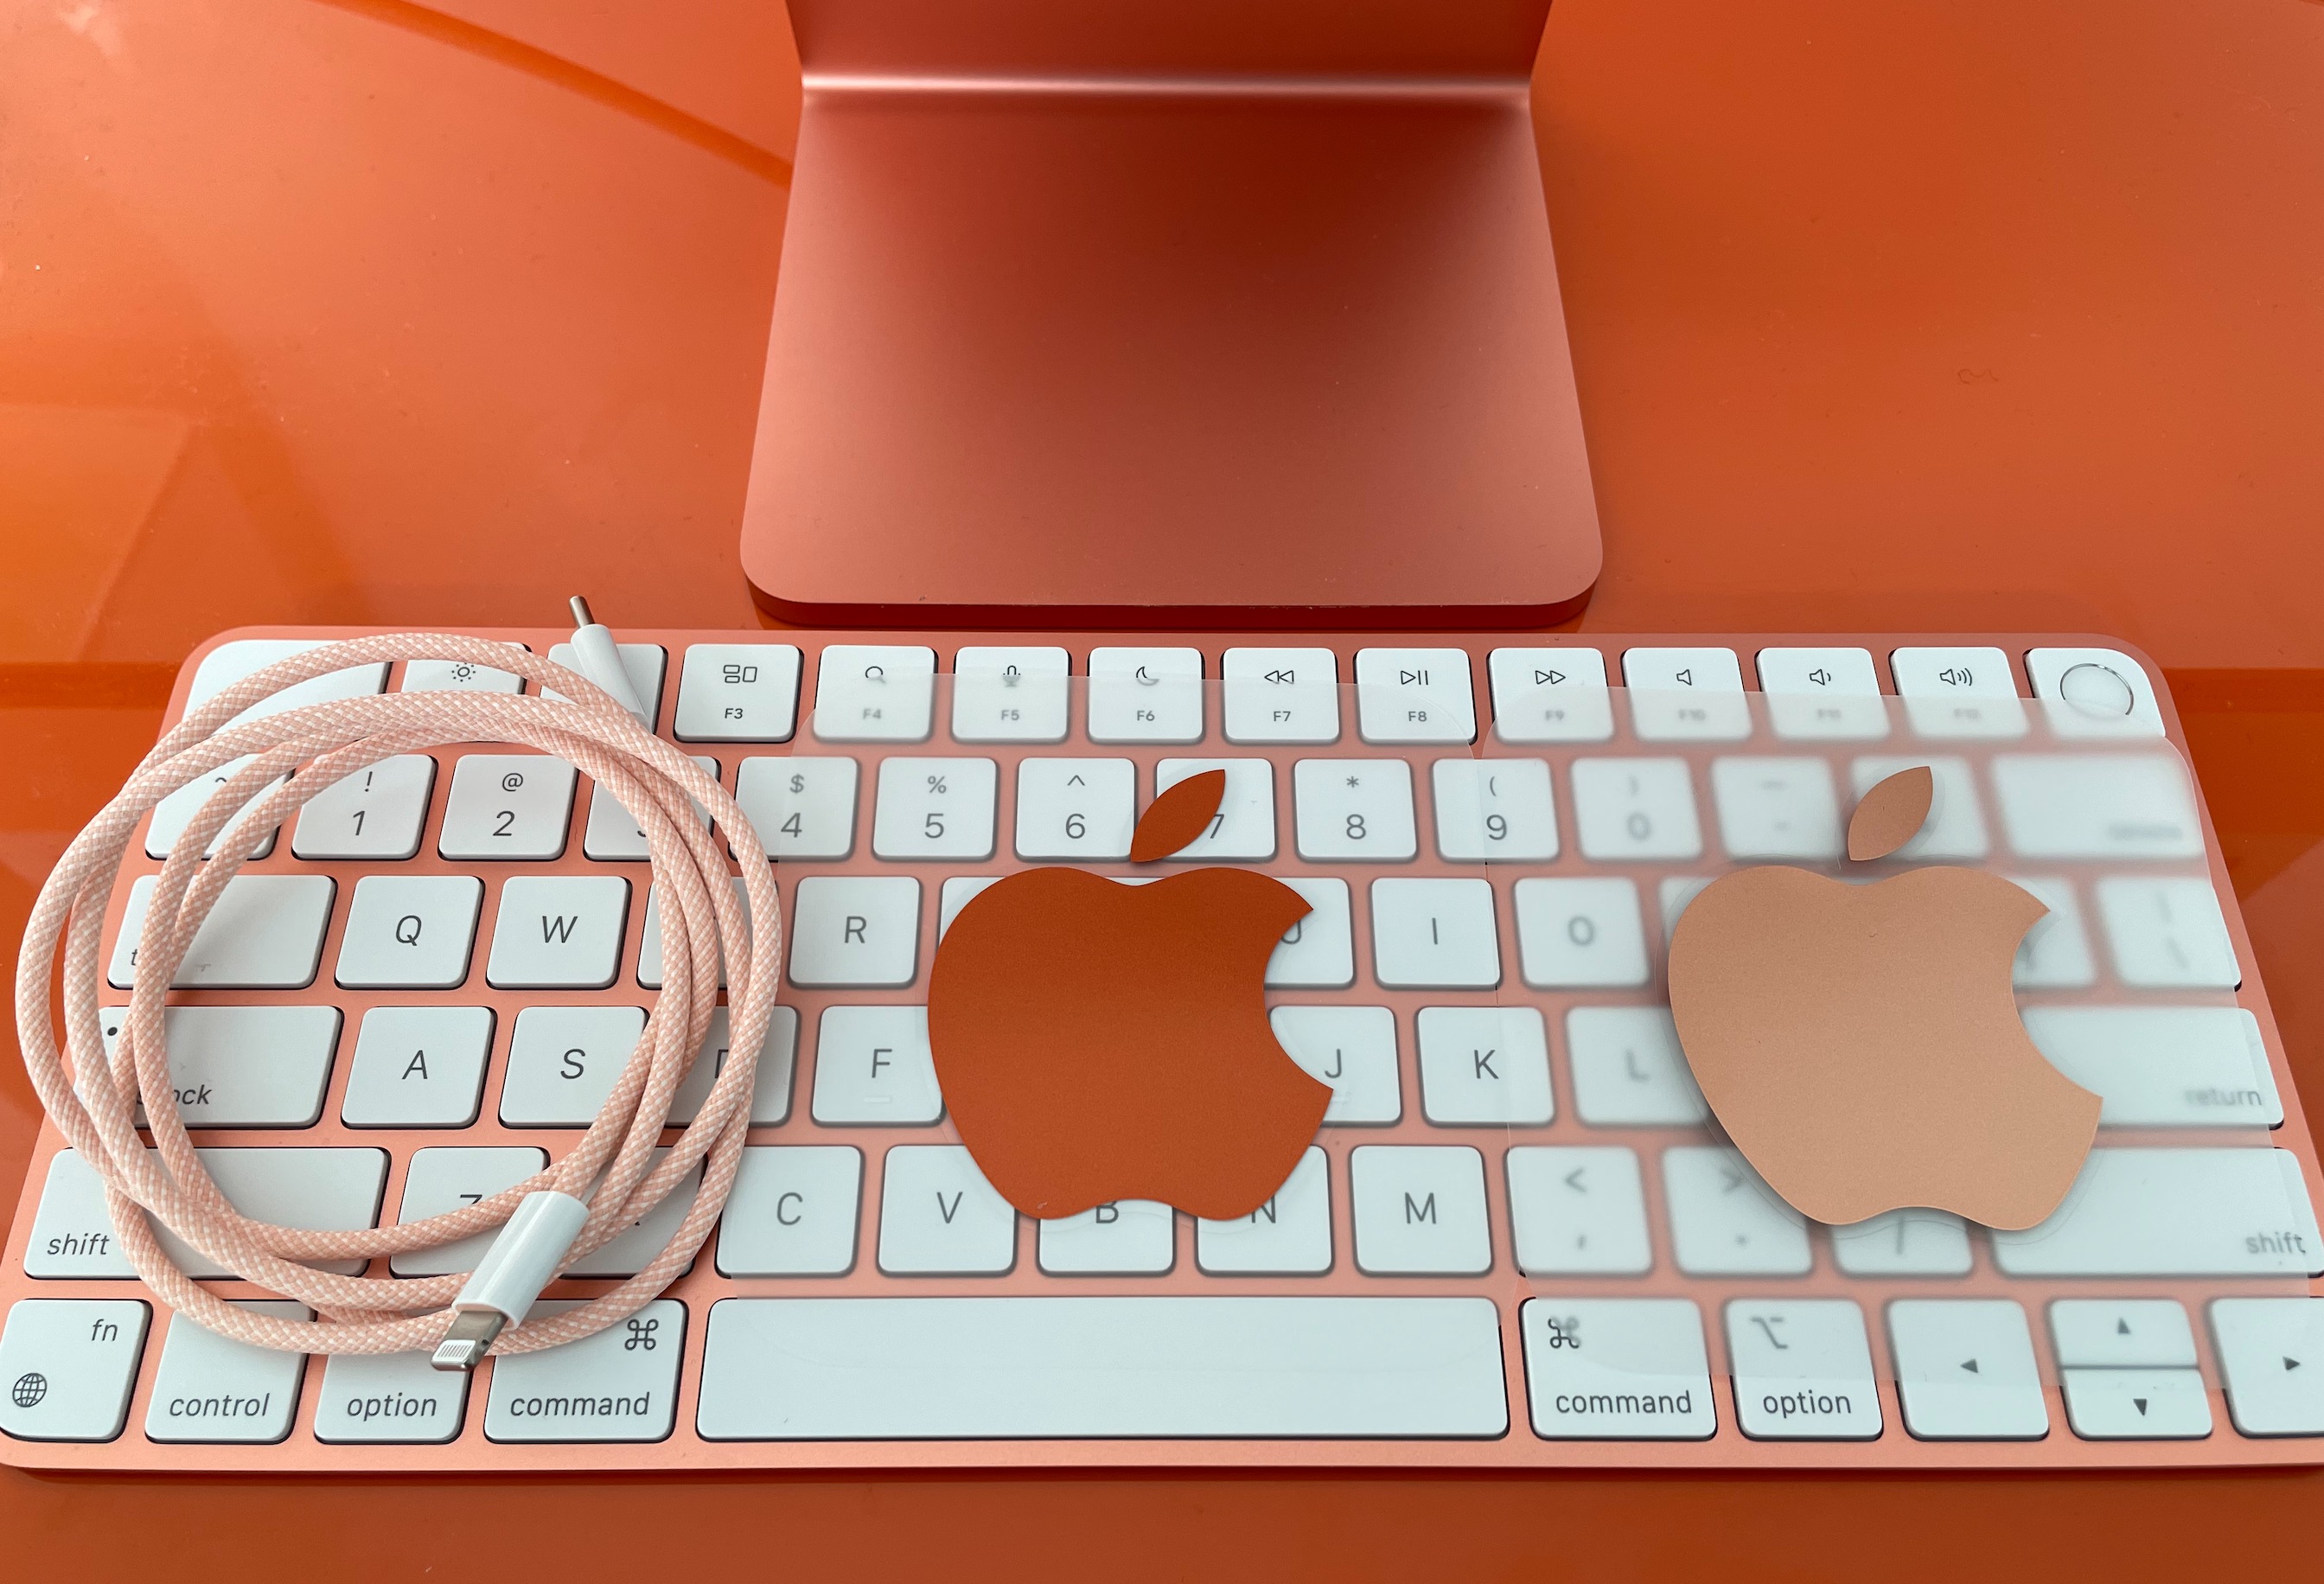 The color-coordinated orange Lightning cable and stickers, atop the orange Touch ID Magic Keyboard.